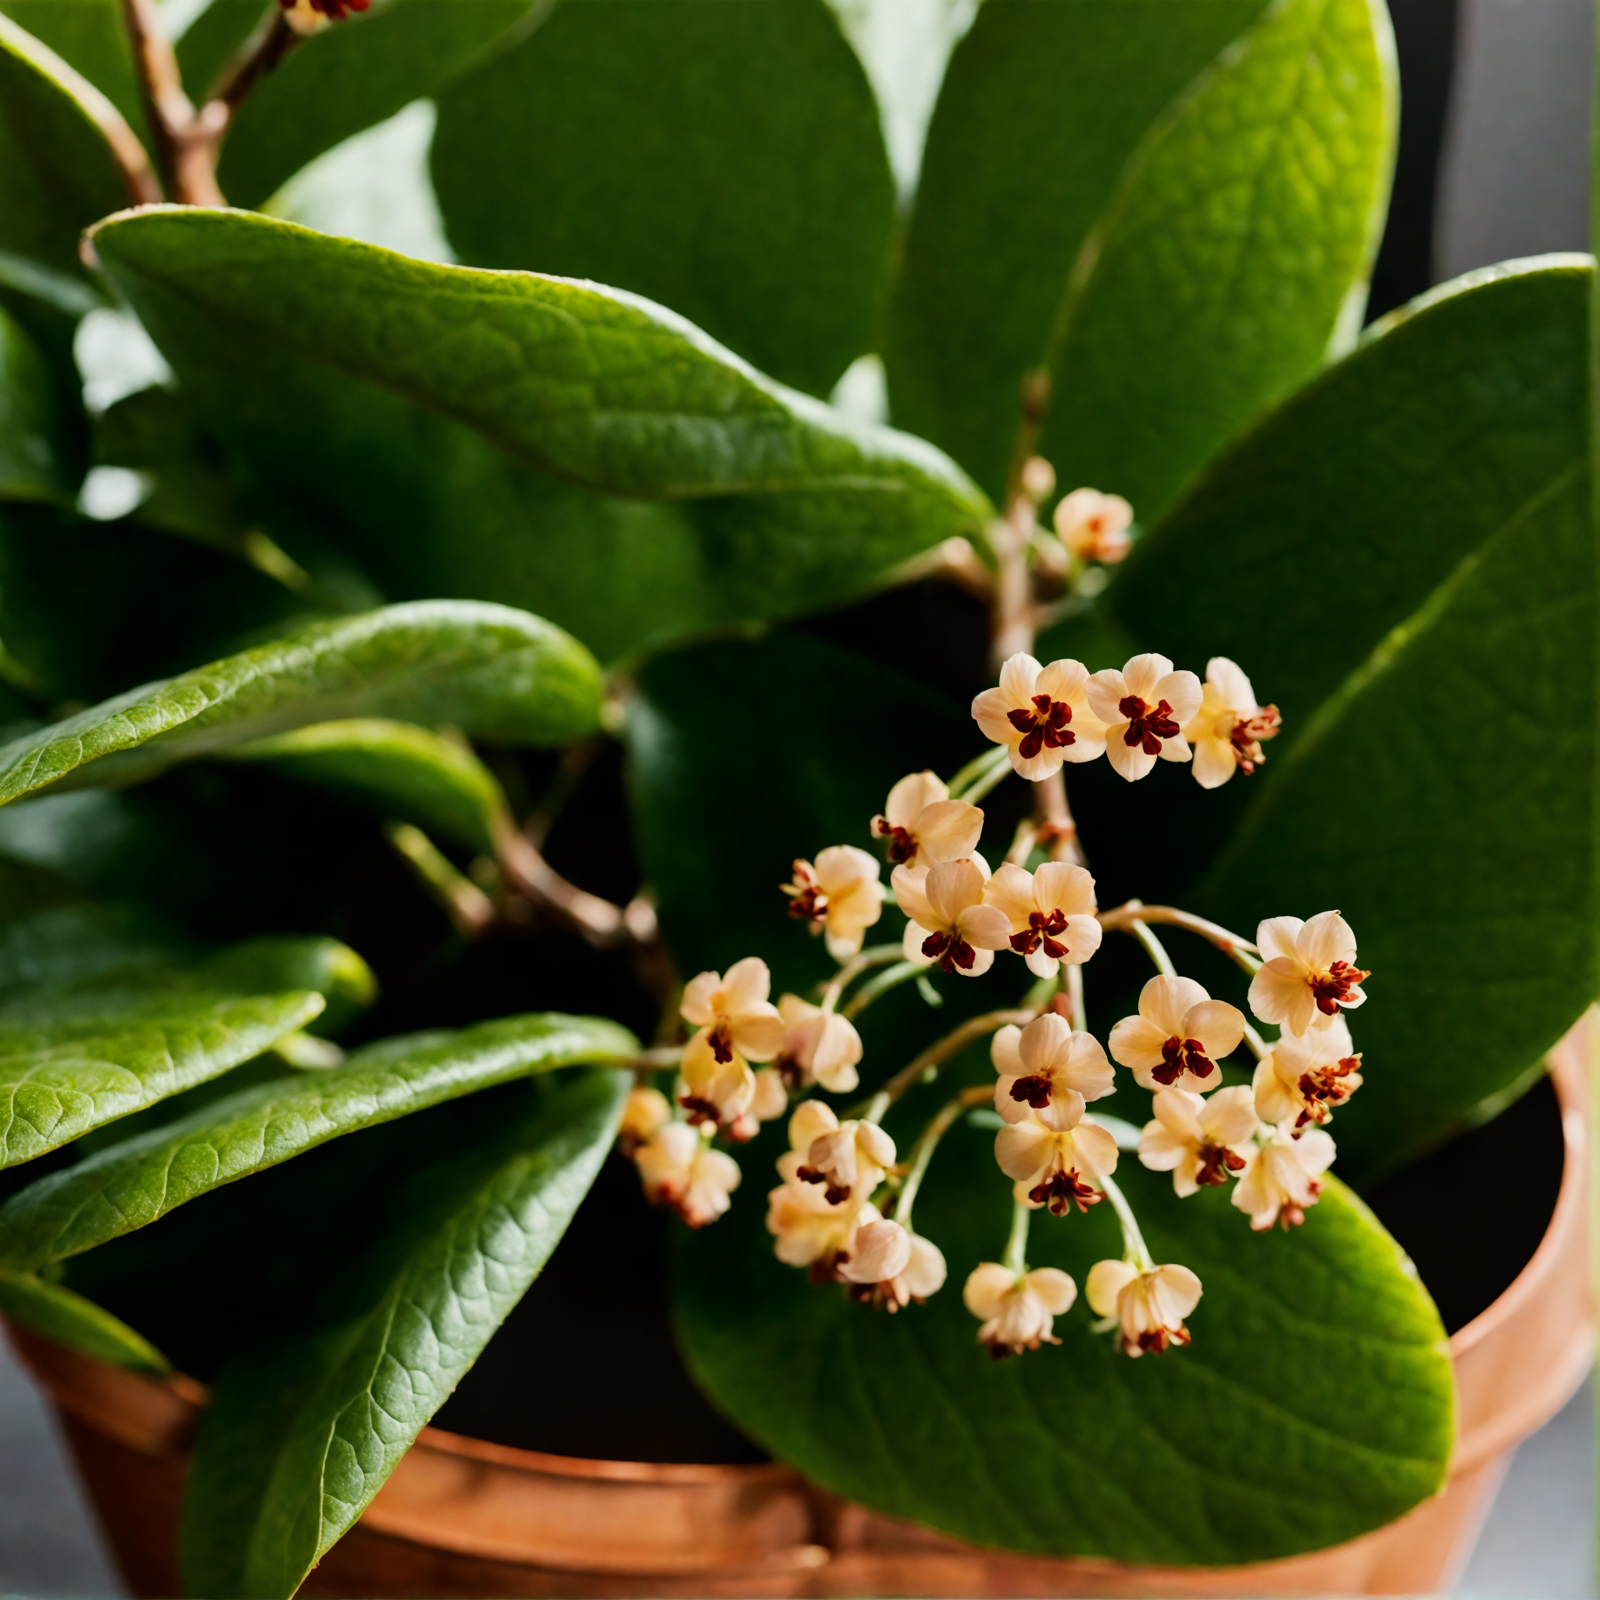 Hoya kerrii with heart-shaped leaves and white flowers in a pot, clear lighting, against a dark background.